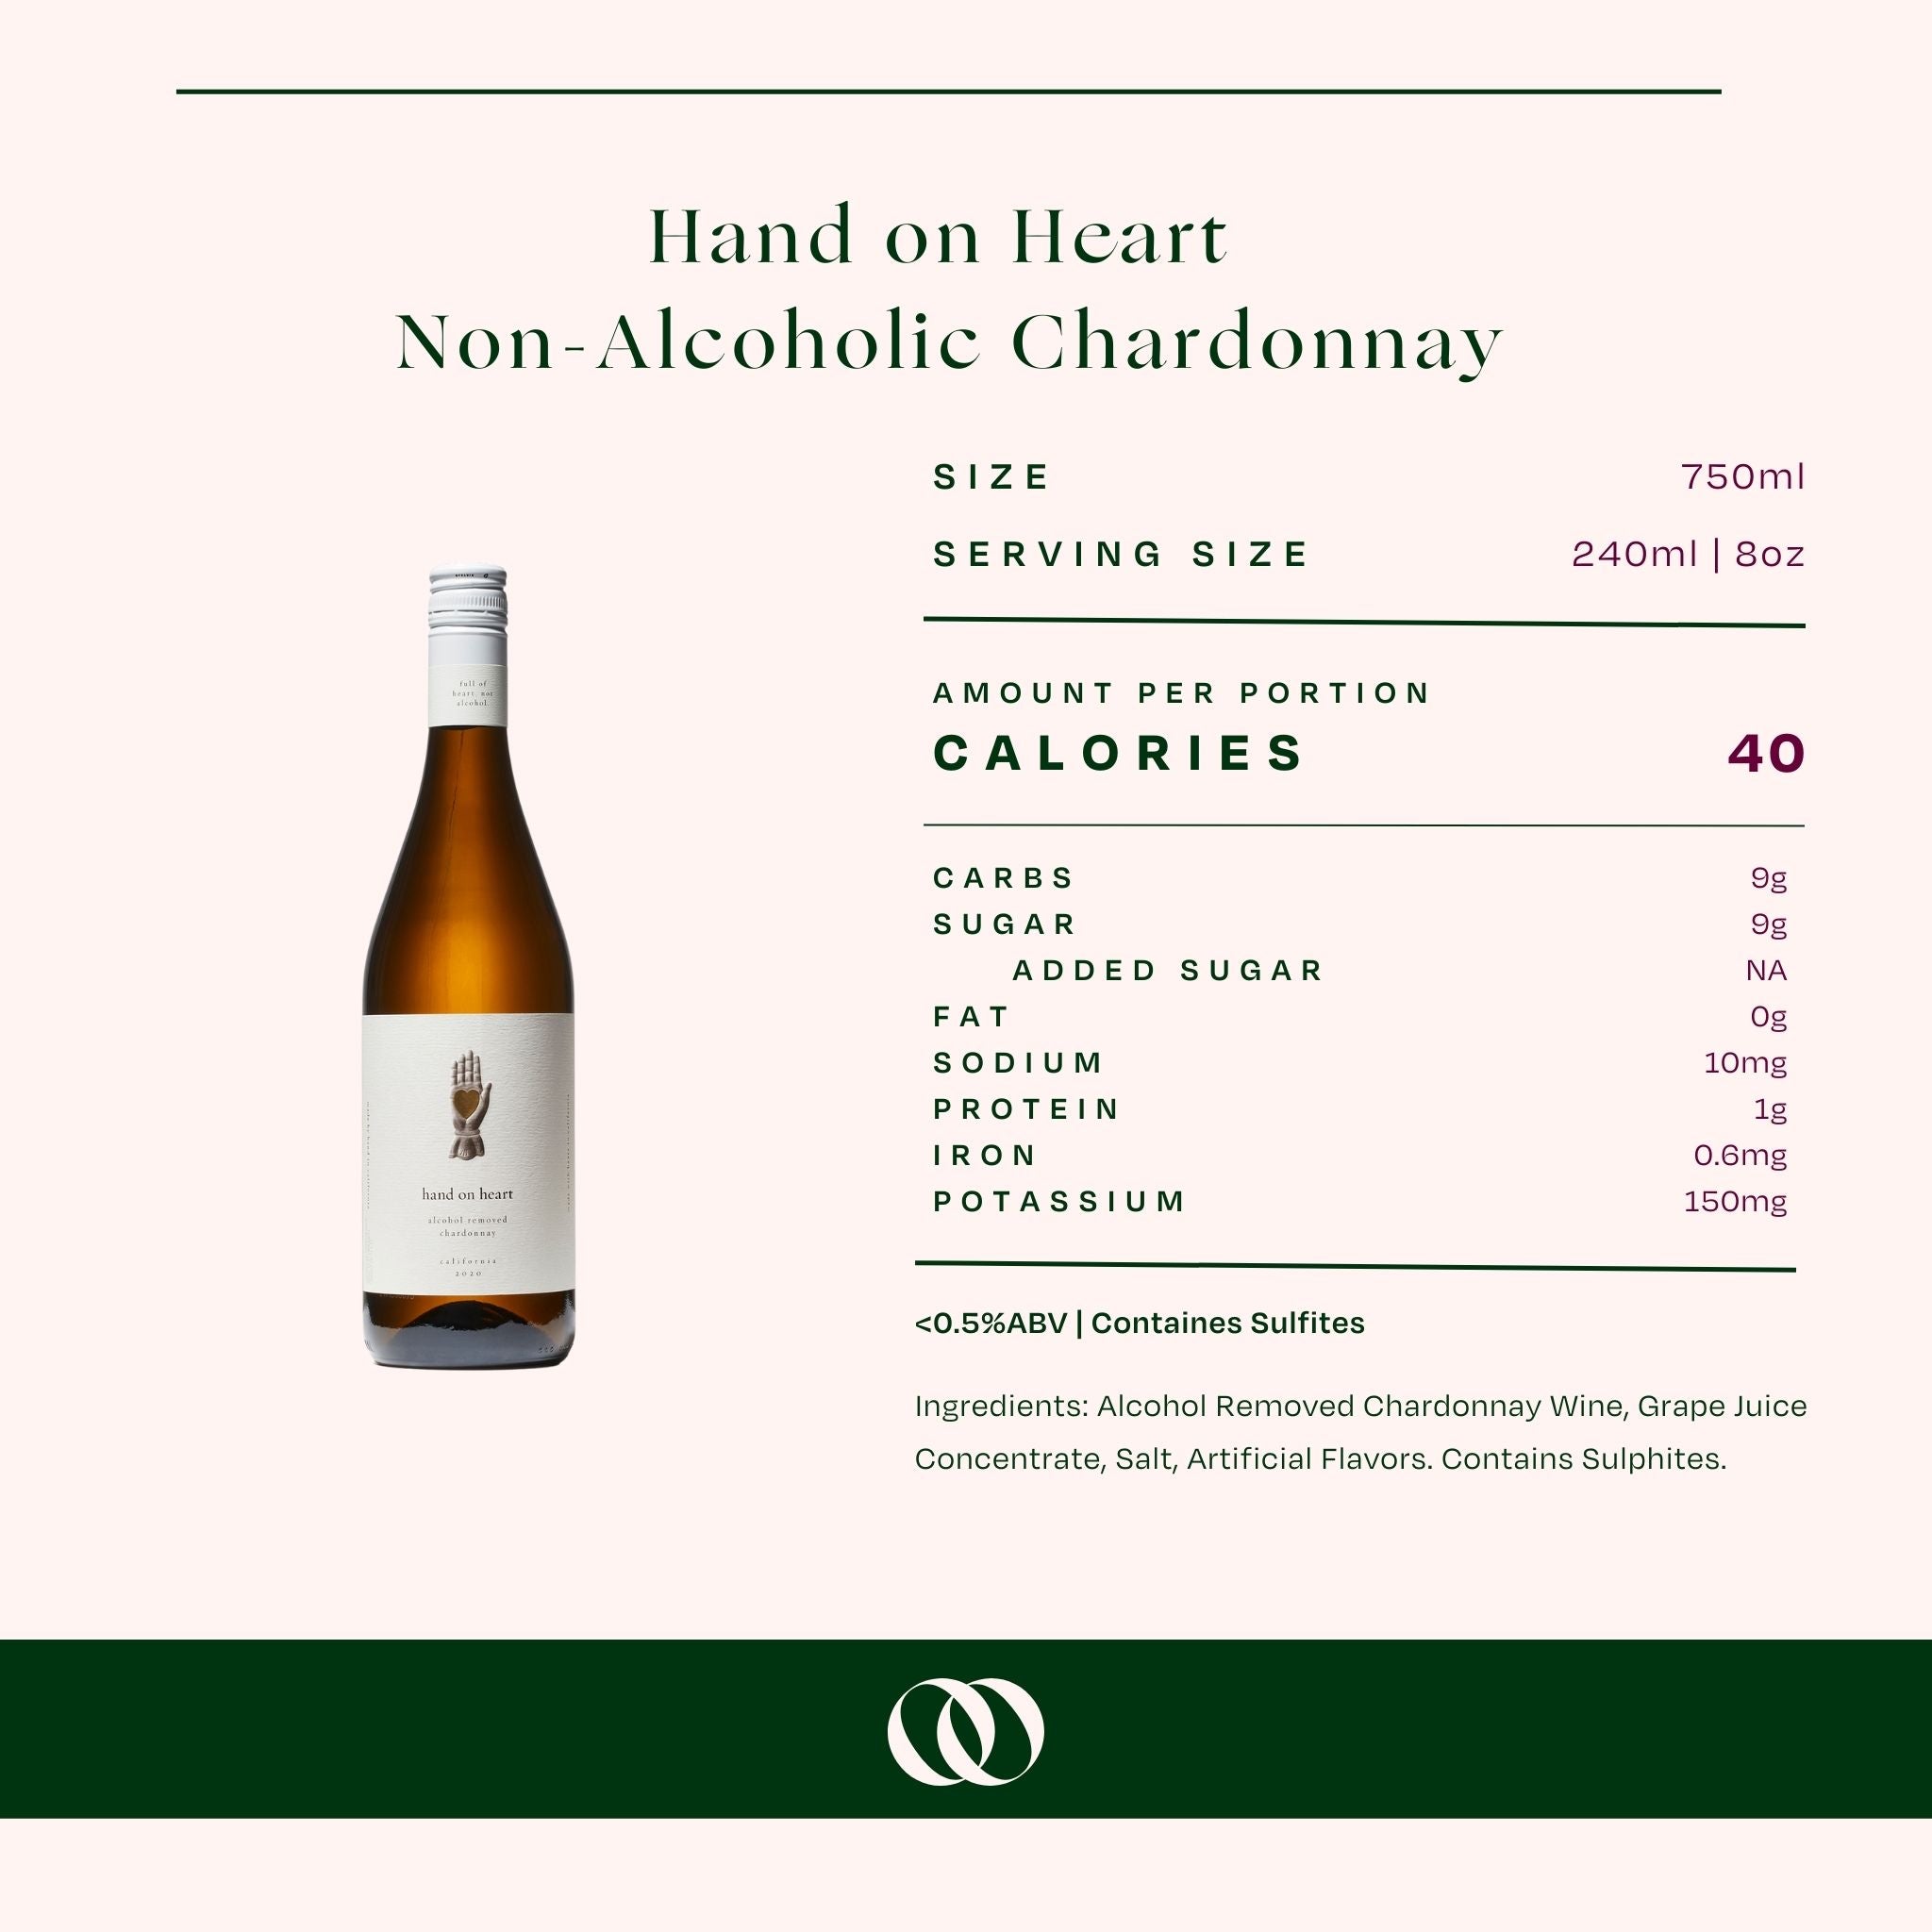 What Is Chardonnay Wine?